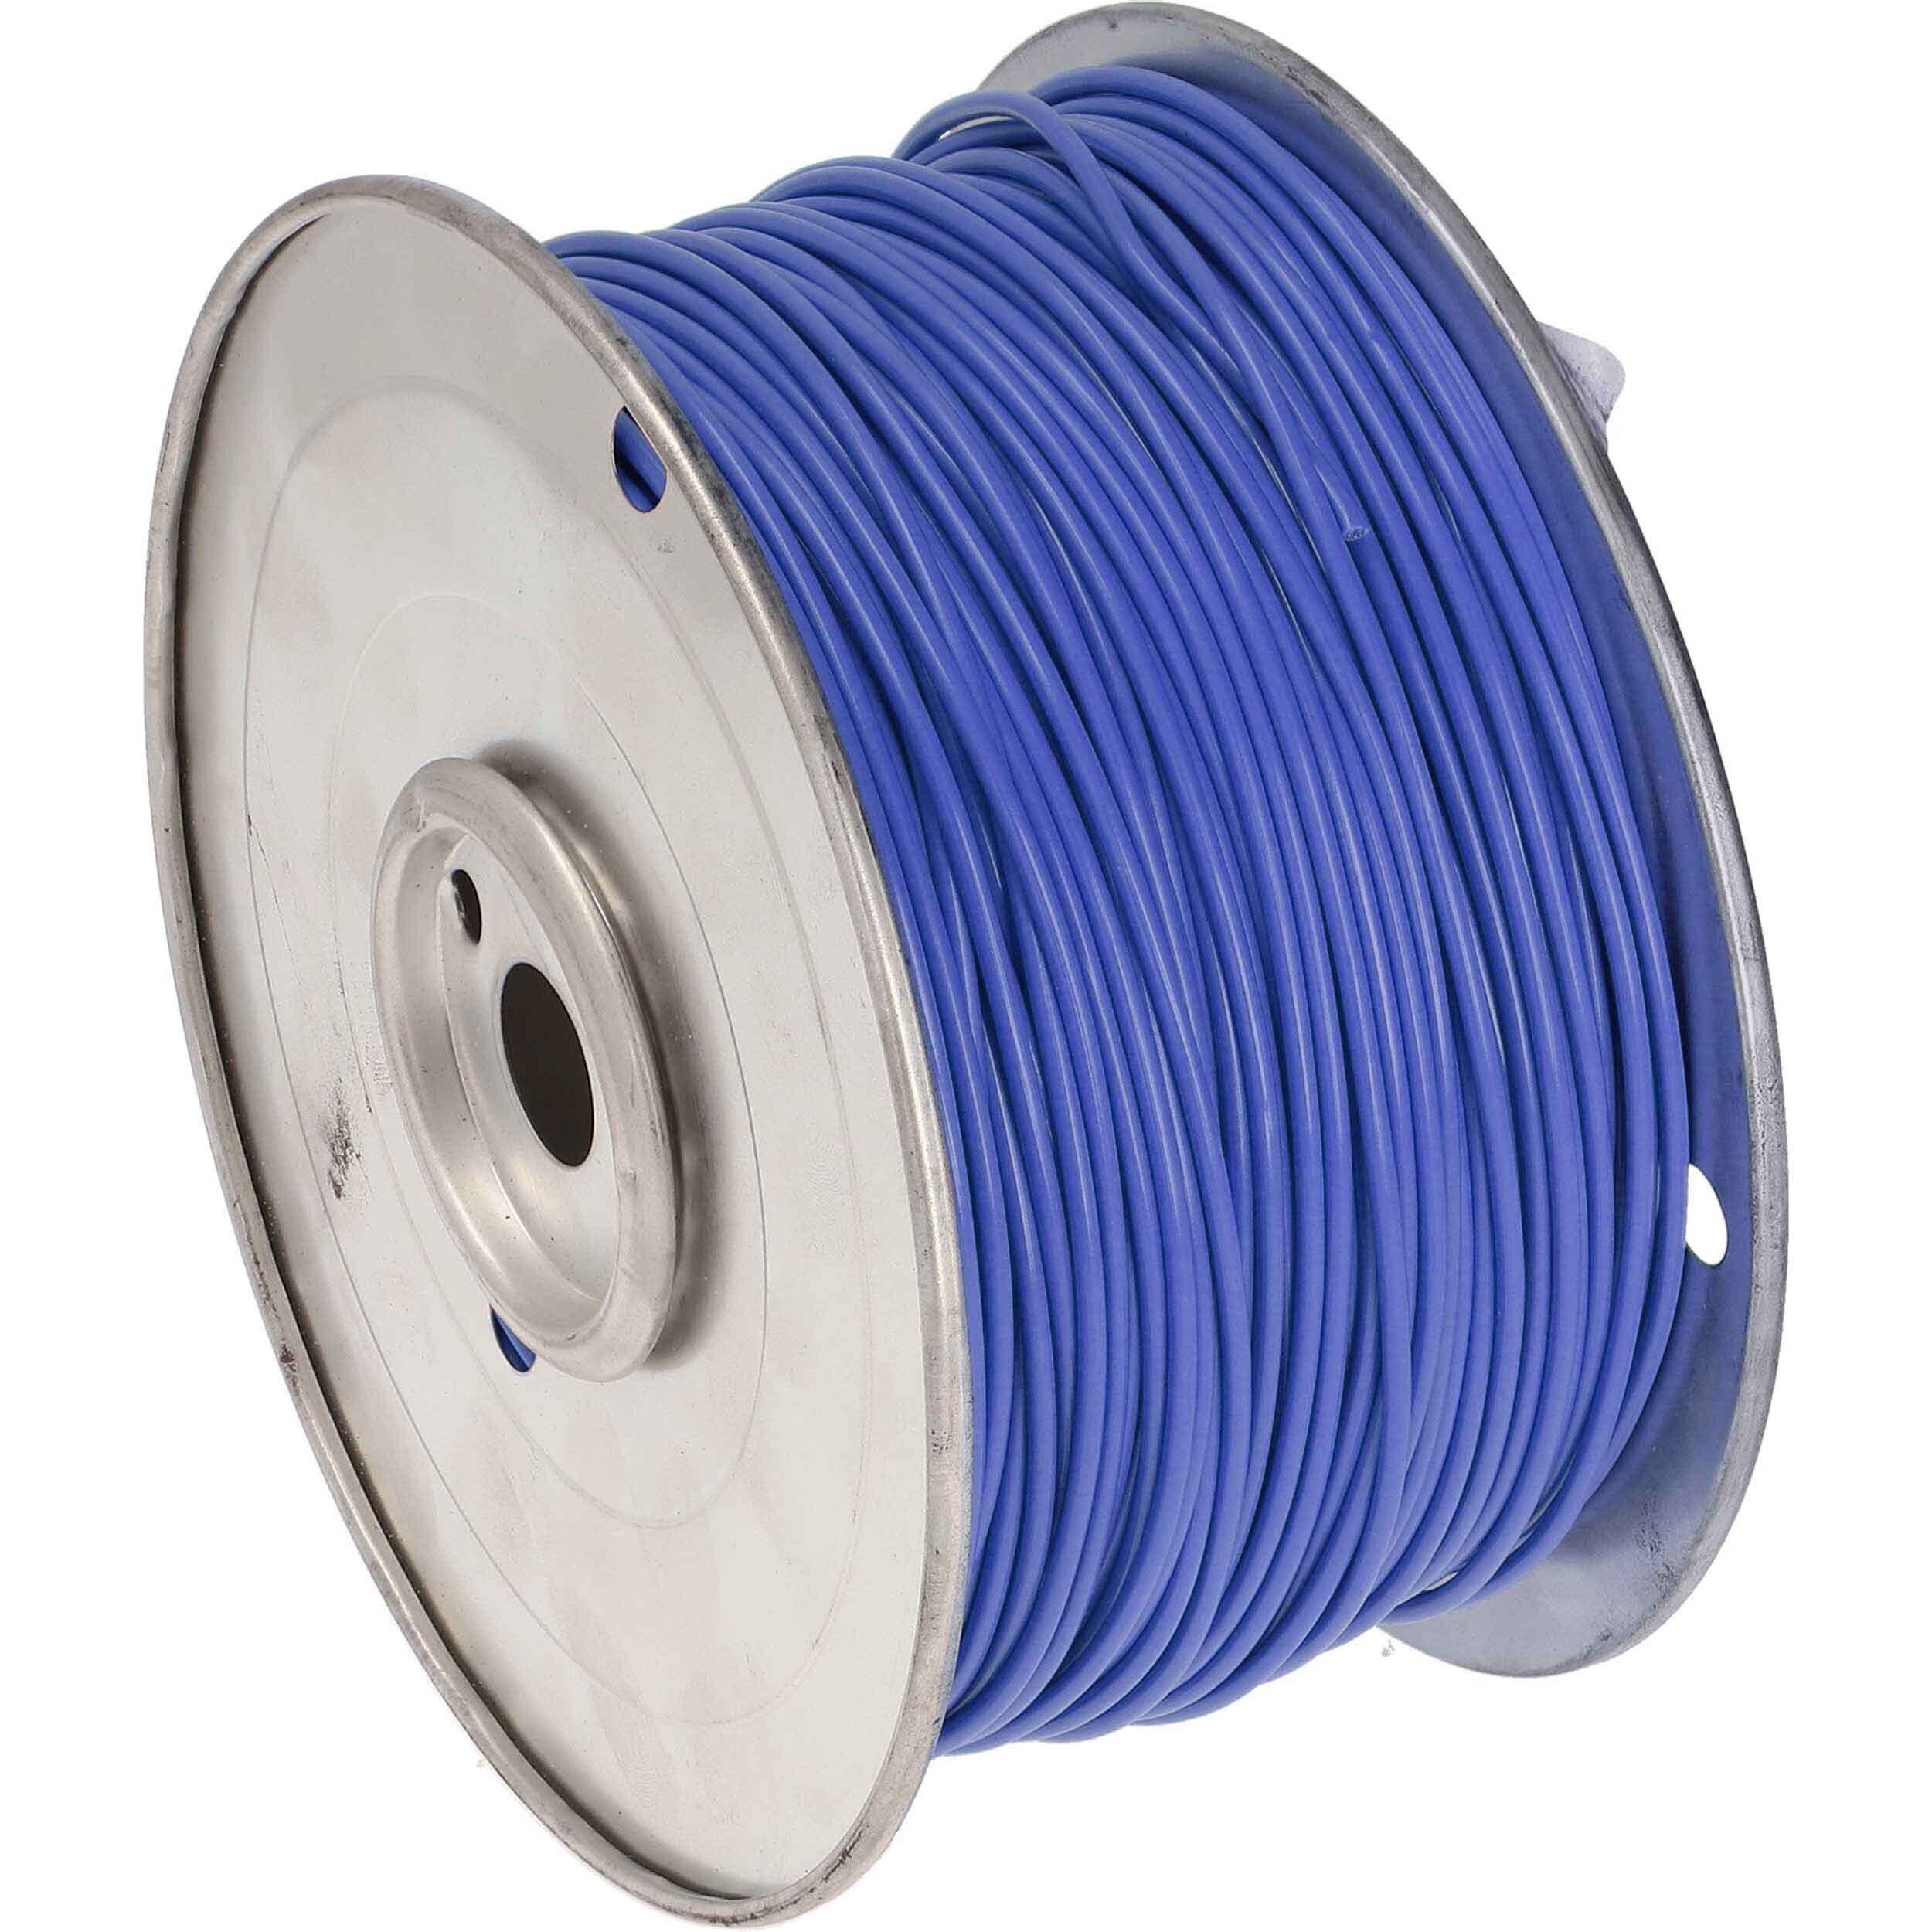 16 GA US GPT ALL COPPER PRIMARY WIRE BLUE - Coil of 500 FT